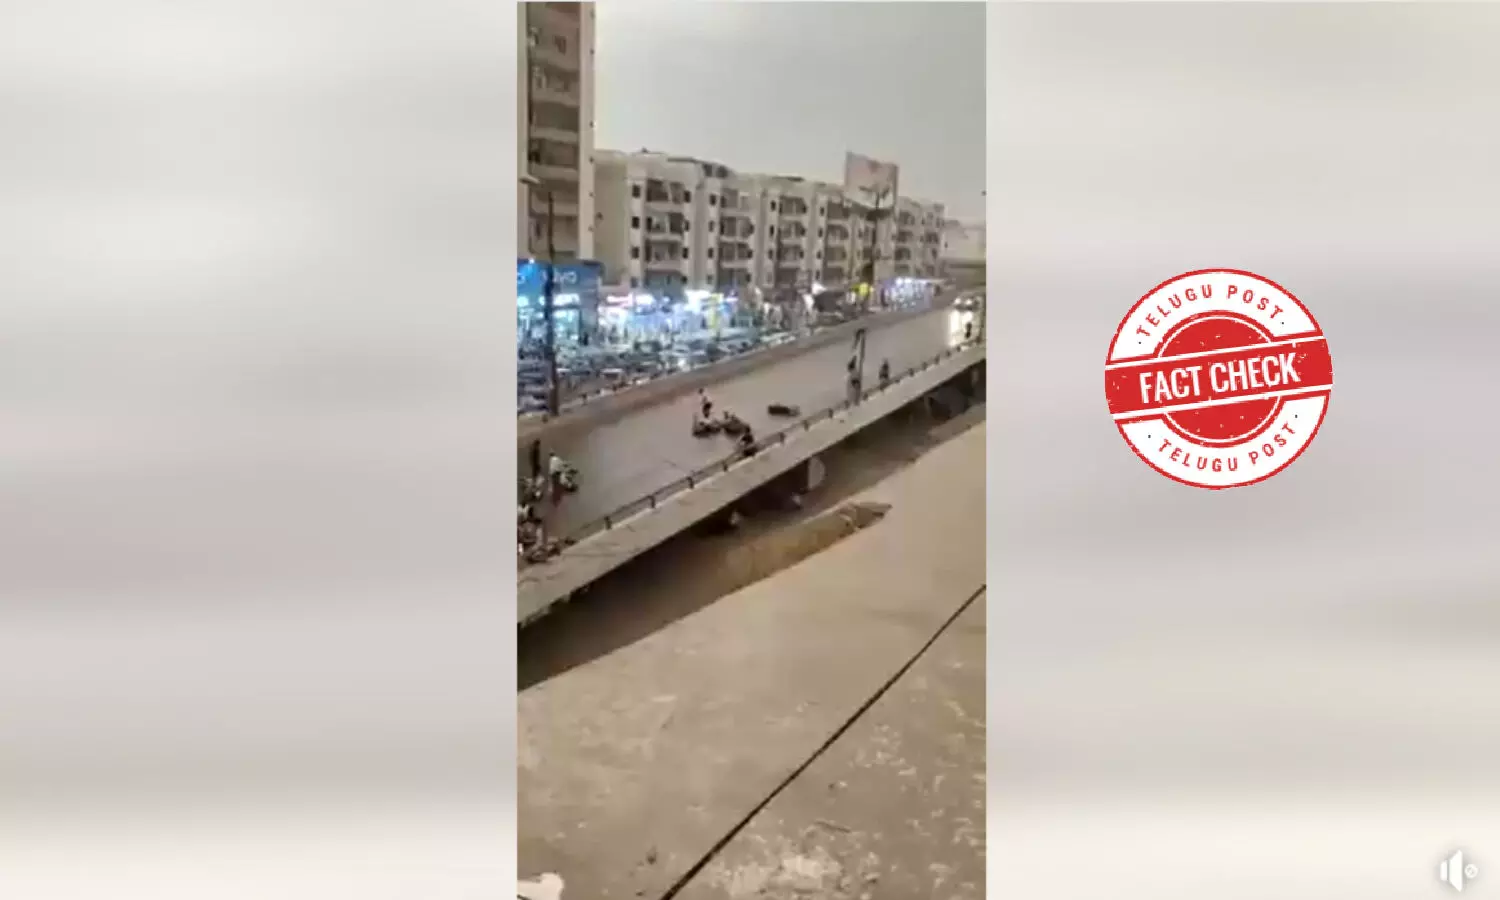 Video of bike crashes on flyover is NOT from Hyderabad